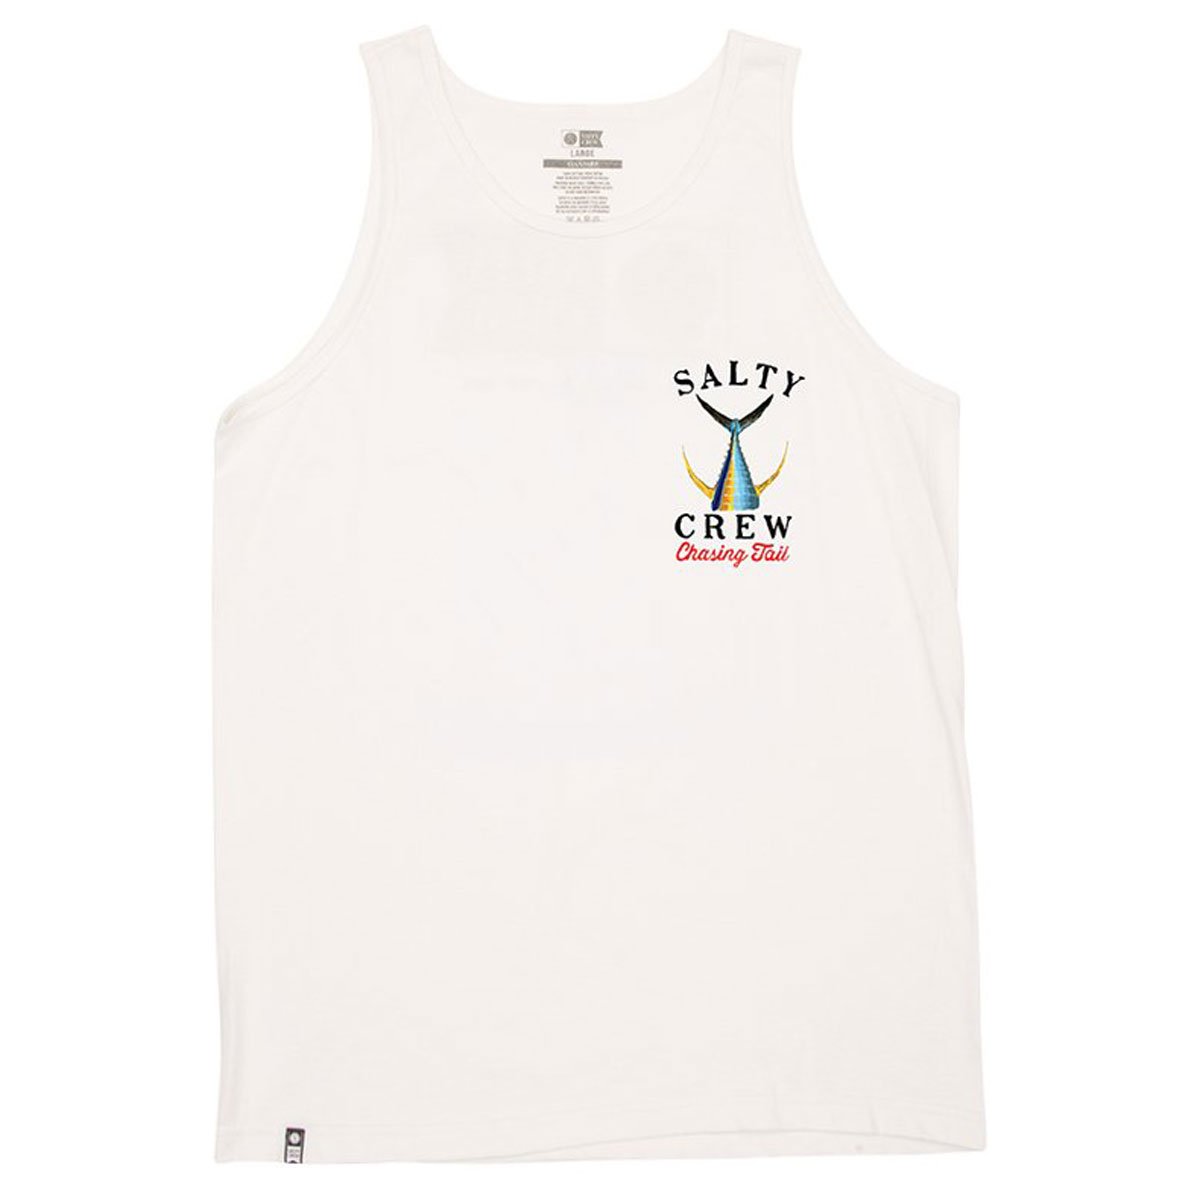 Salty Crew Tailed Tank Top - White image 1